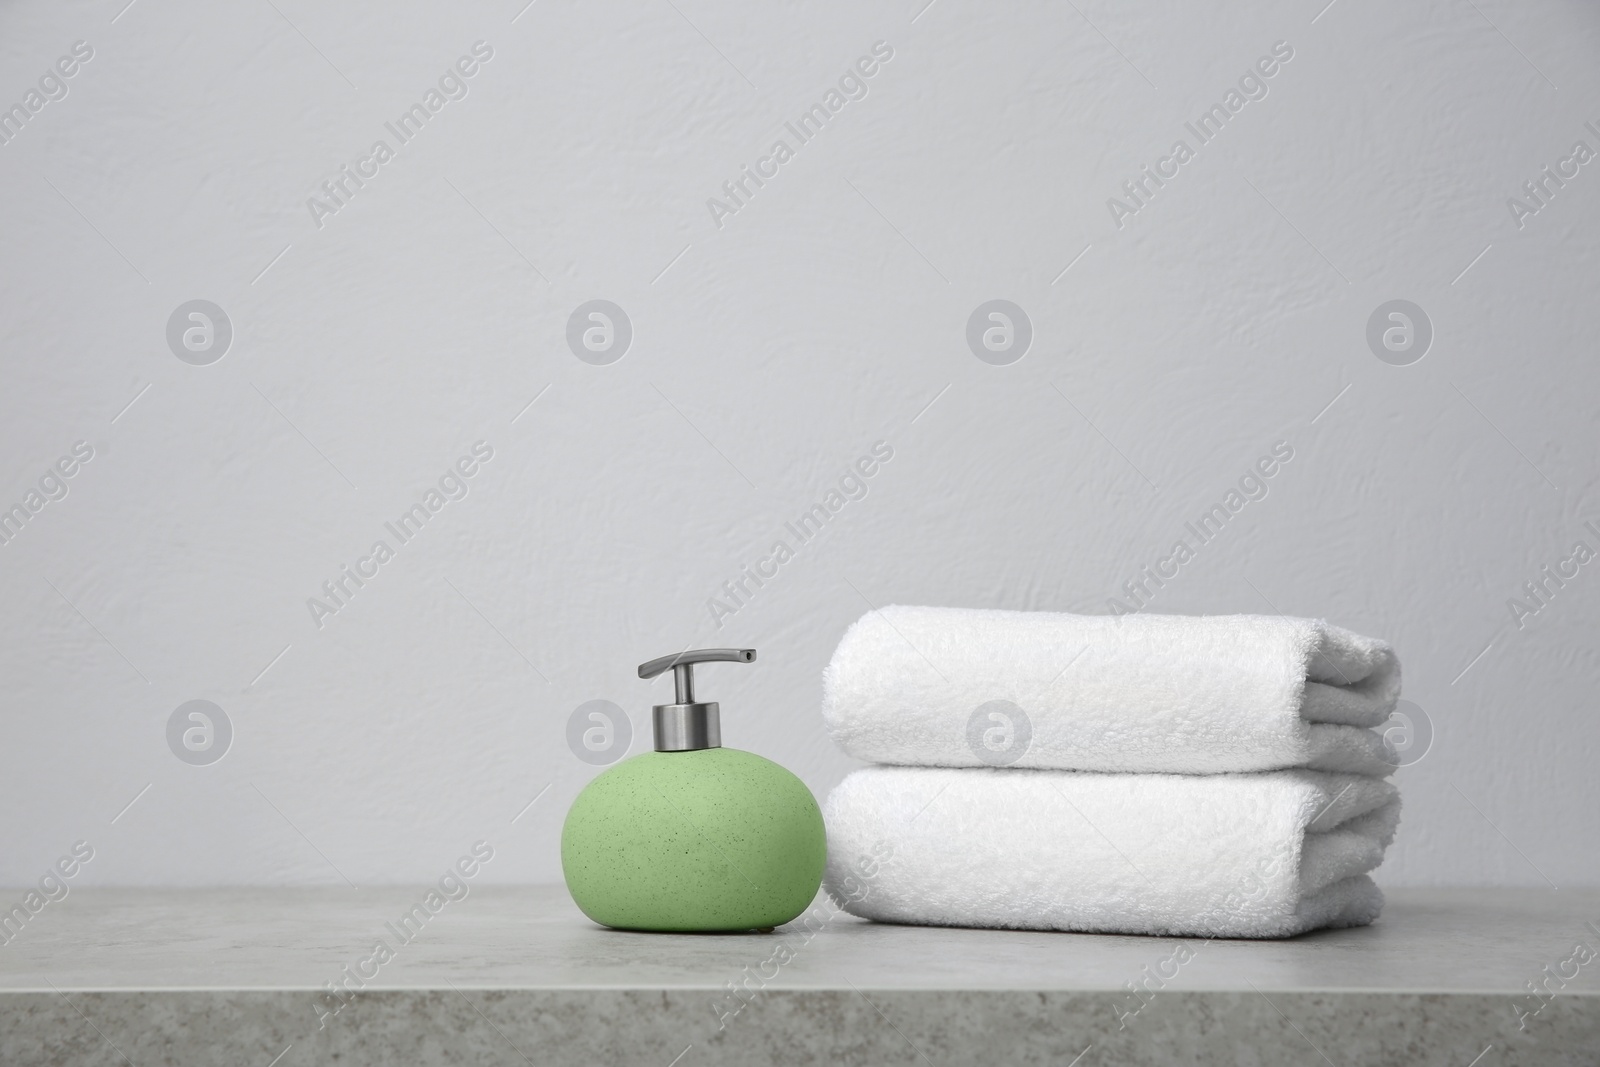 Photo of Clean towels and soap dispenser on table against grey background